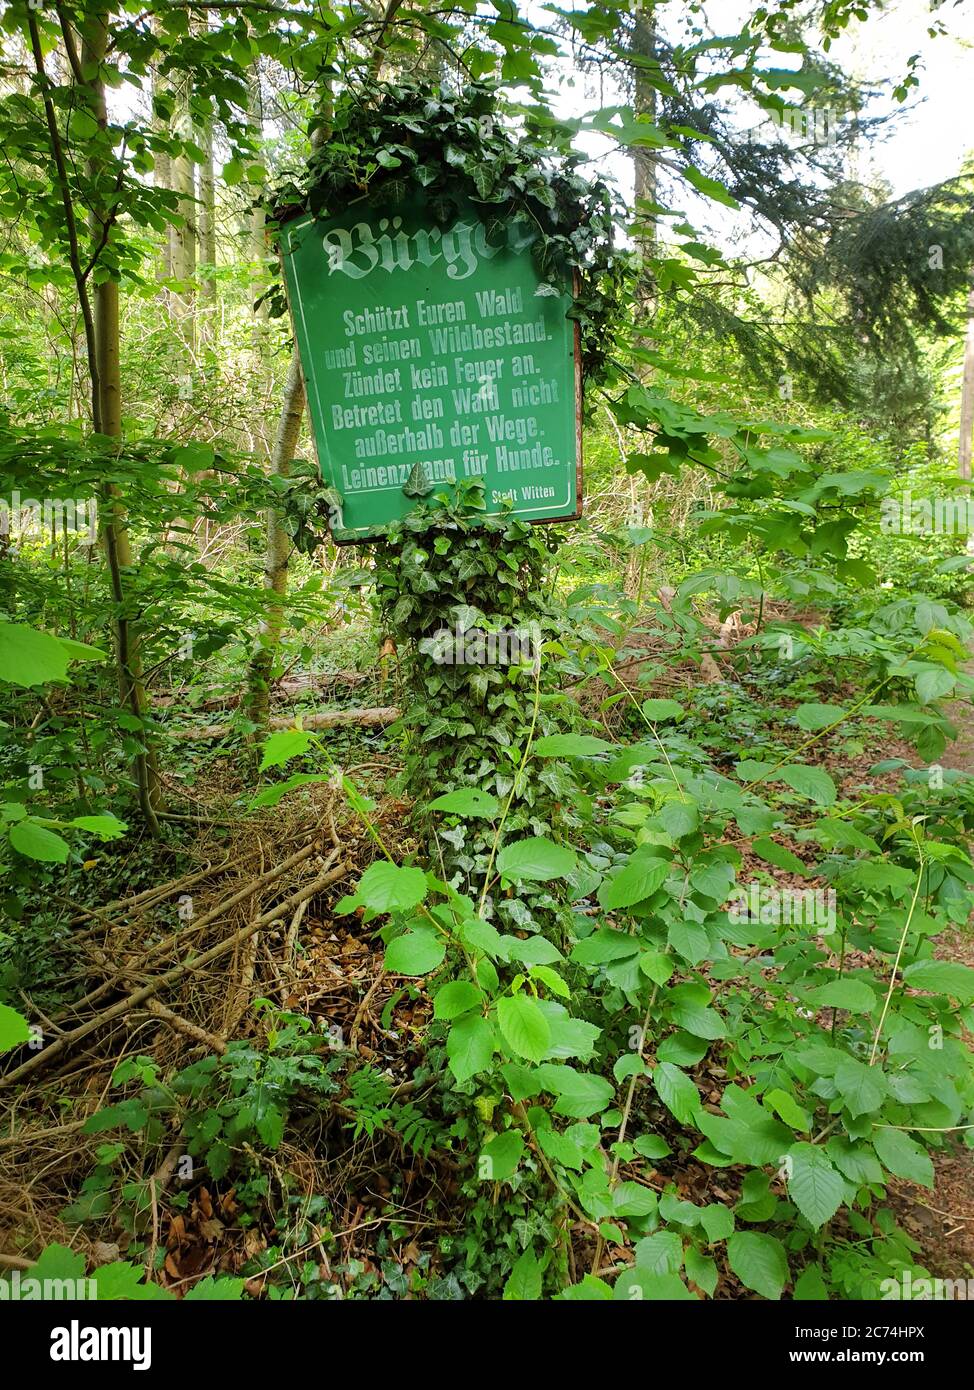 old sign in a forest, people, serve your forest, Dogs must be kept on leads, Germany, North Rhine-Westphalia, Ruhr Area, Witten Stock Photo